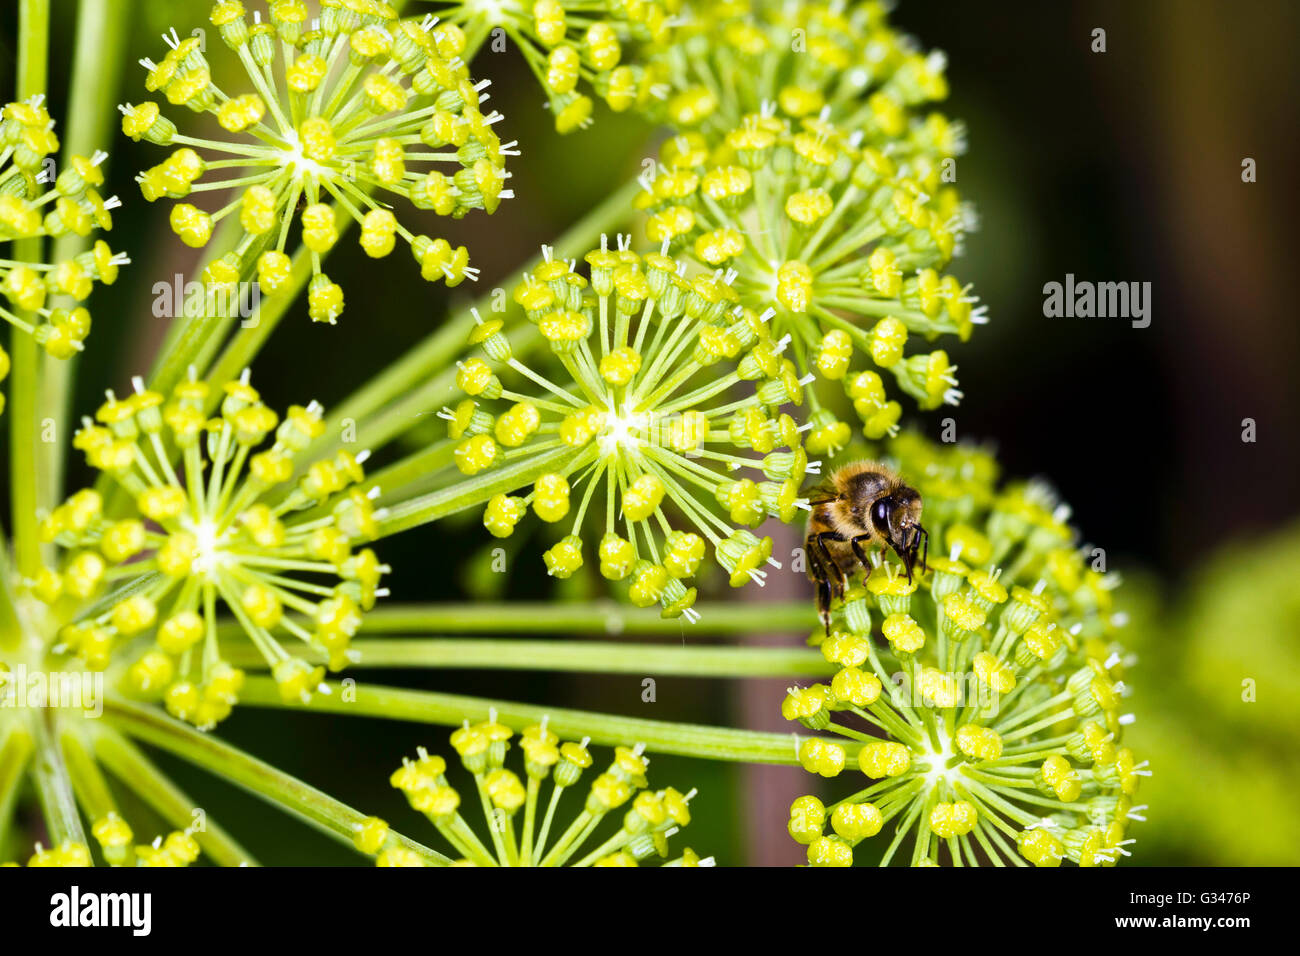 Close-up of Angelica archangelica flower head with bee Stock Photo